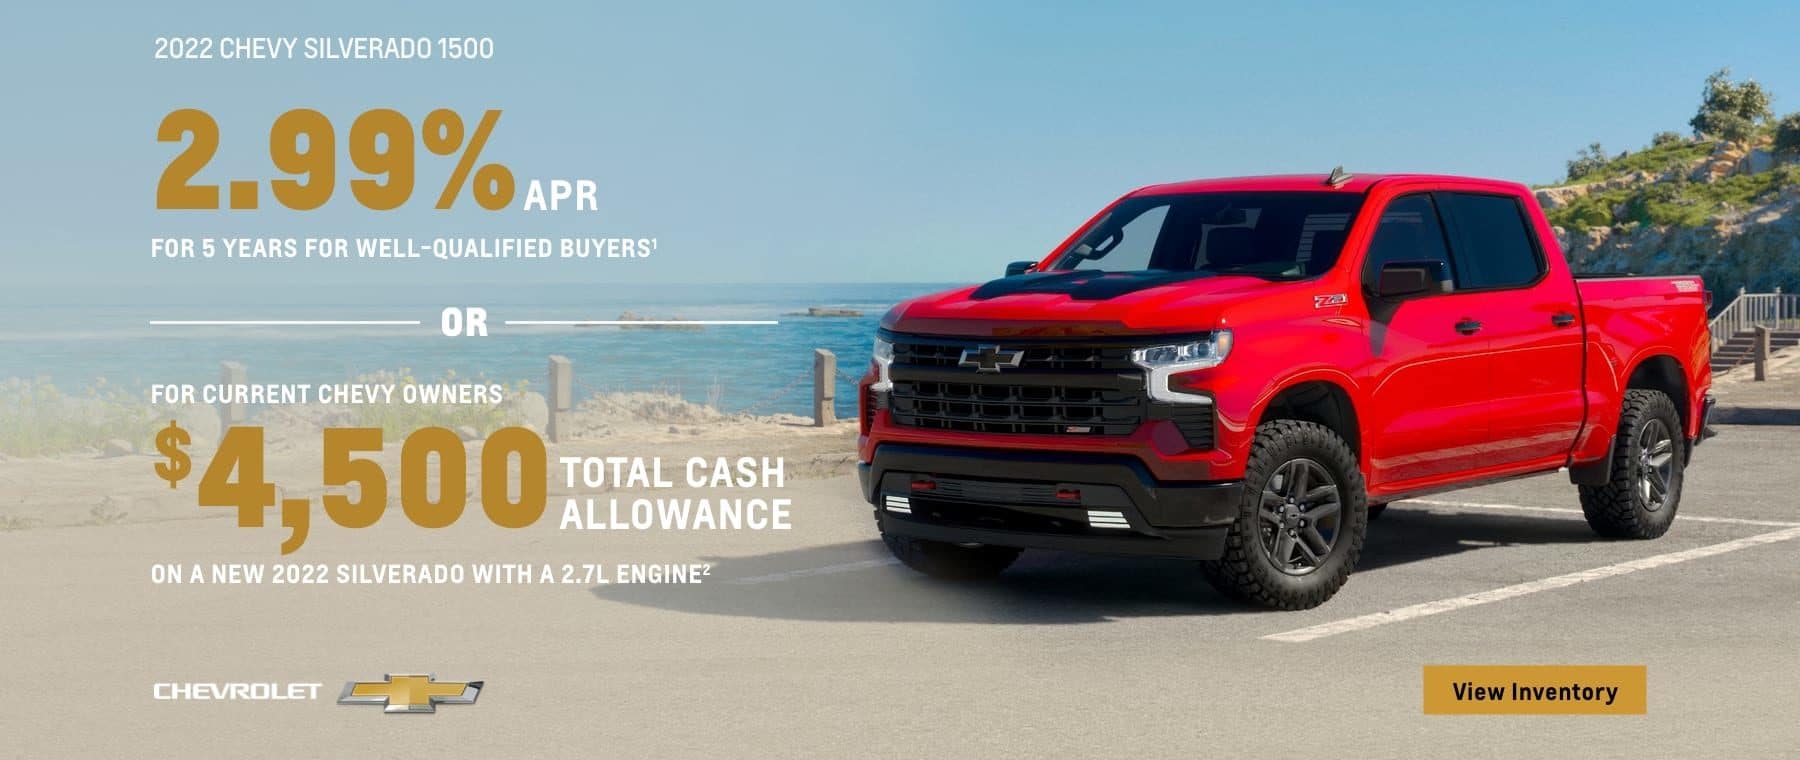 2022 Chevy Silverado 1500. 2.99% APR for 5 years for well-qualified buyers. Or, for current Chevy owners $4,500 total cash allowance on a new 2022 Silverado with a 2.7L engine.